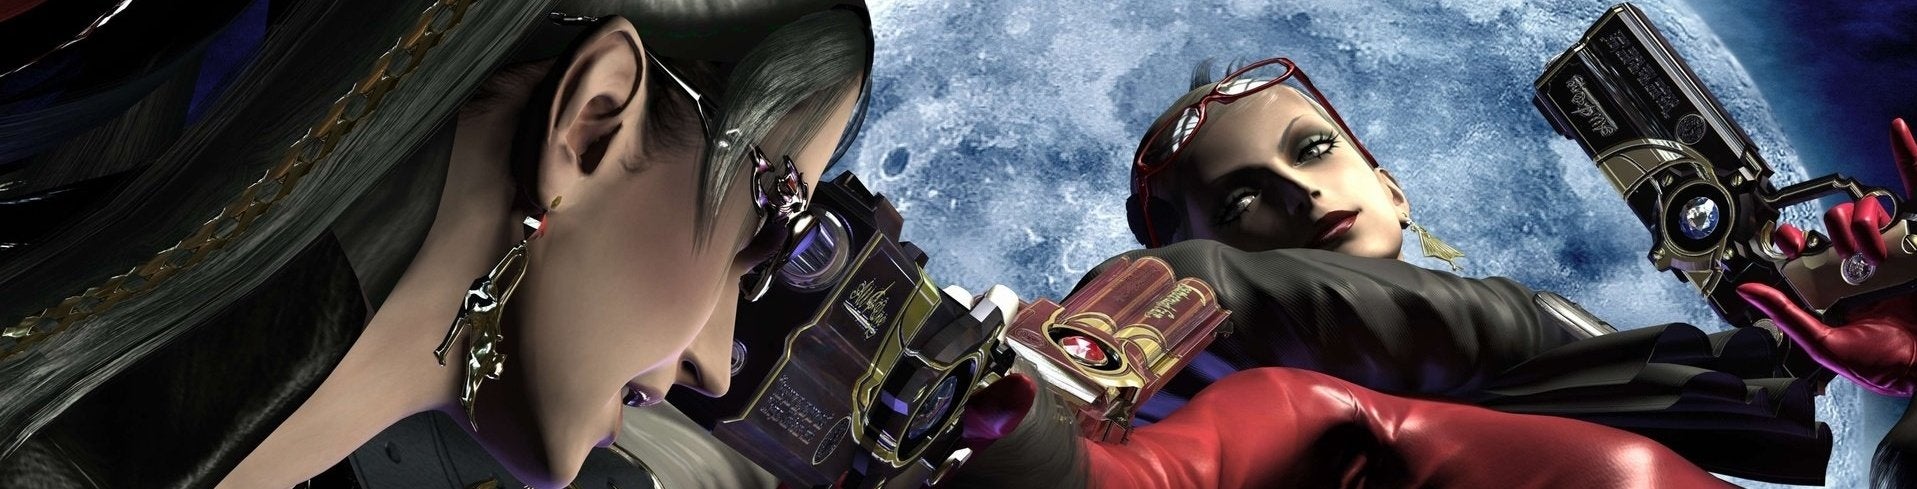 Image for Face-Off: Bayonetta on Wii U